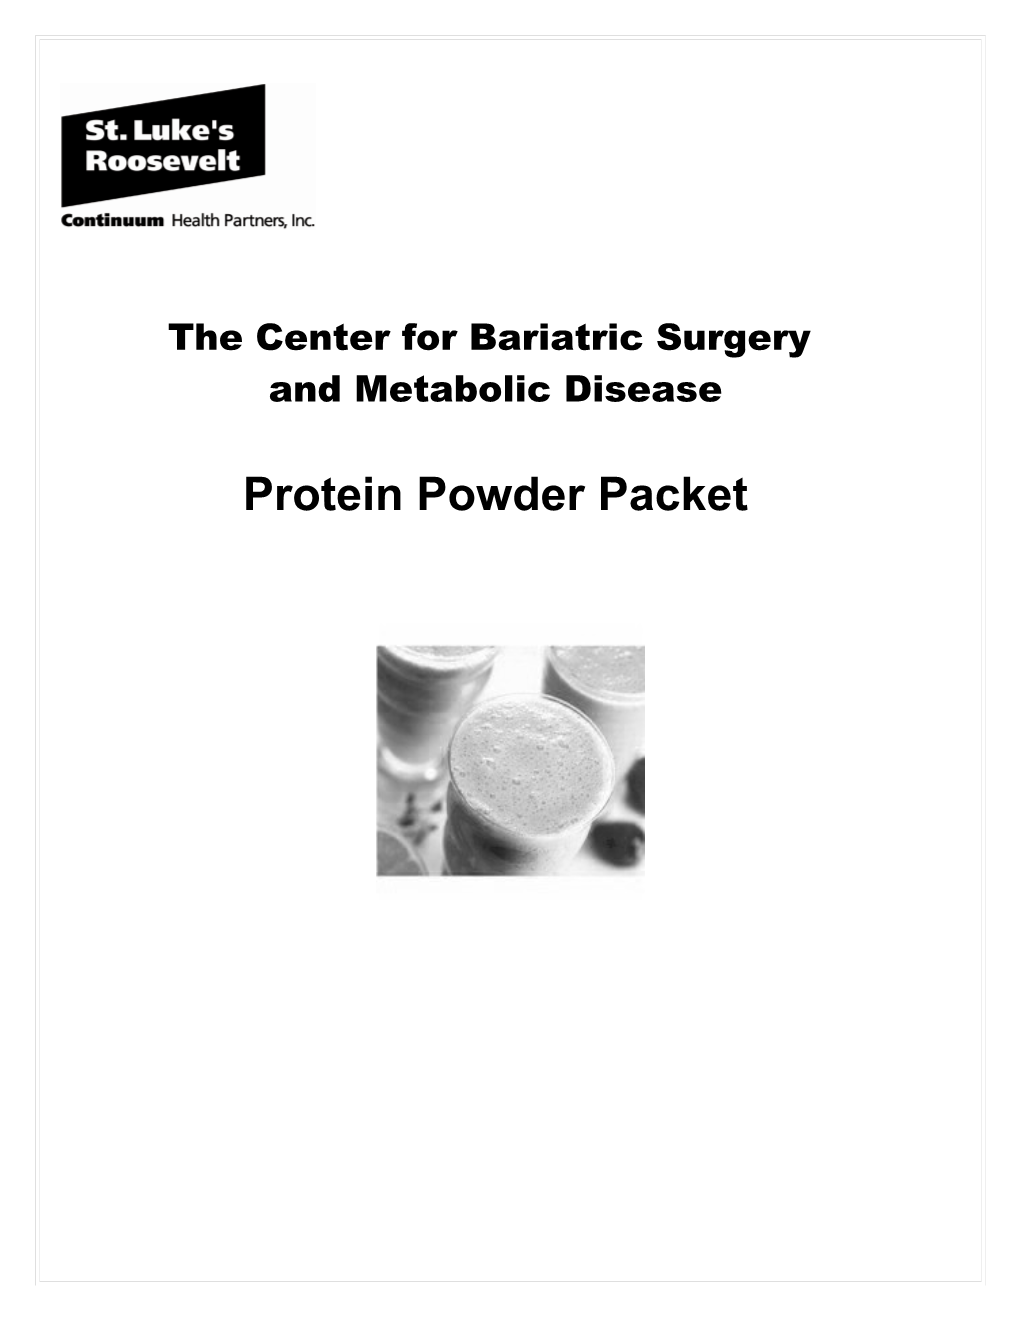 The Center for Bariatric Surgery